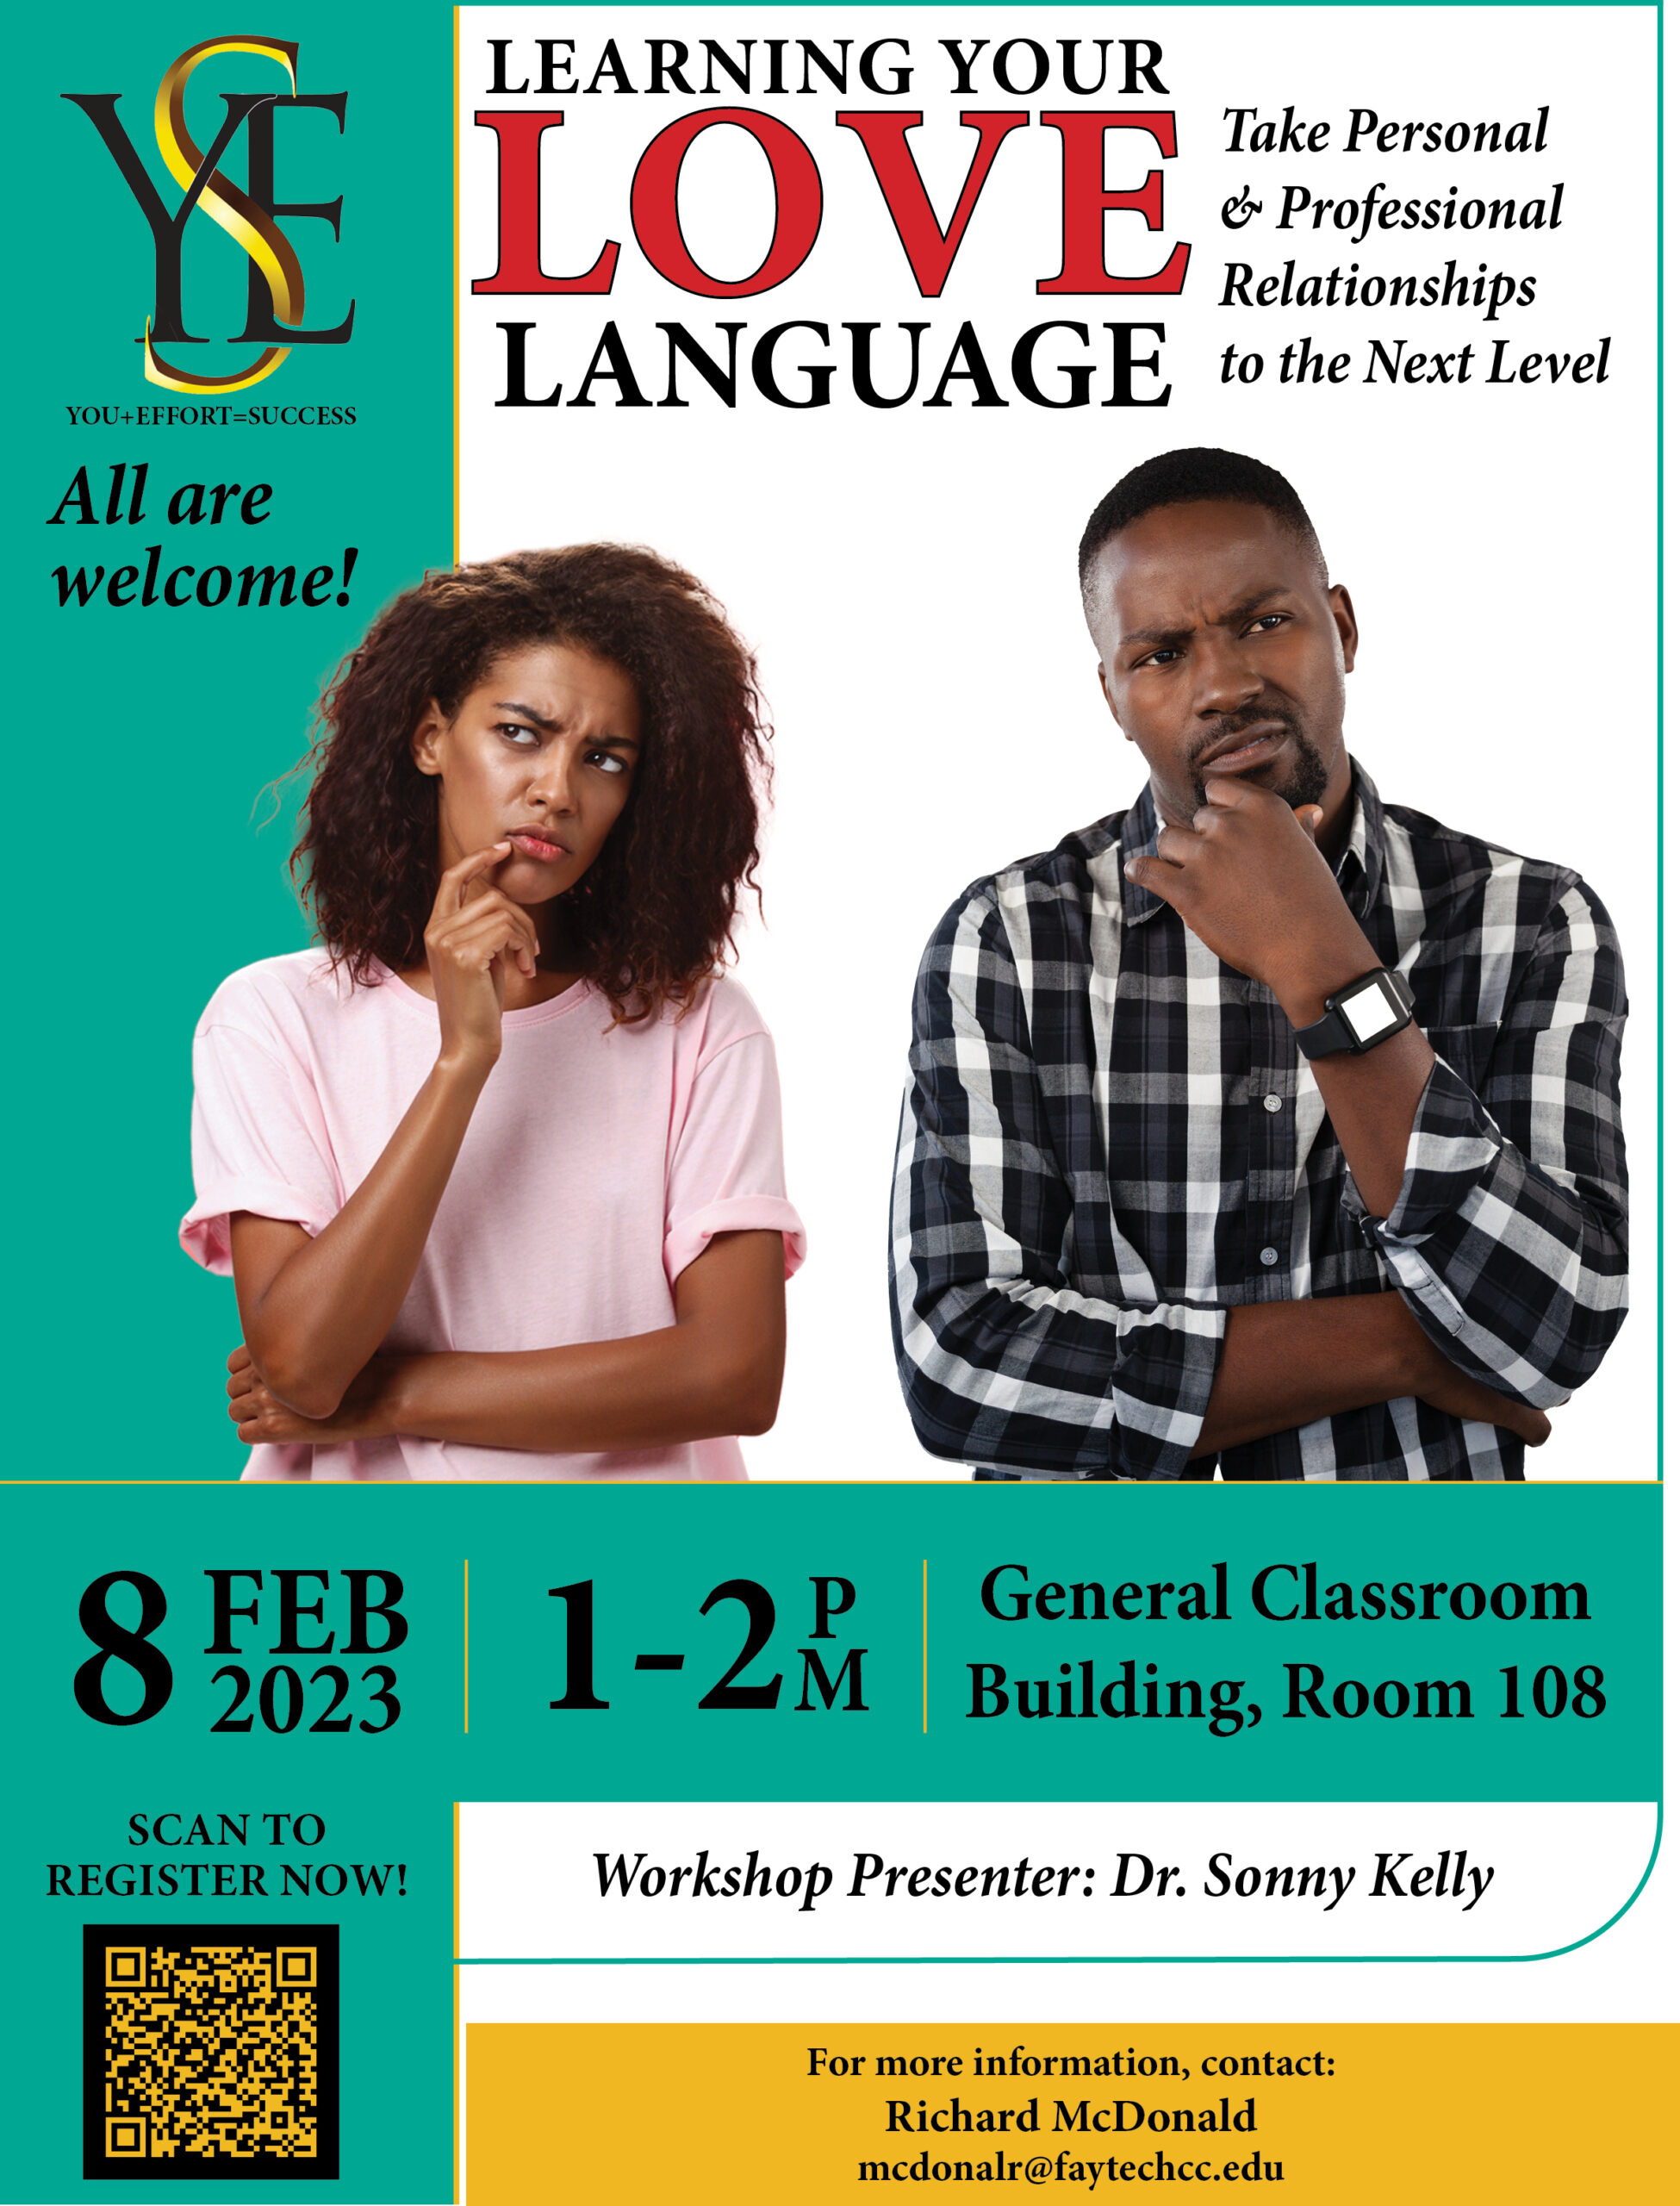 YES Learning Your Love Language Flyer 2 Scaled 